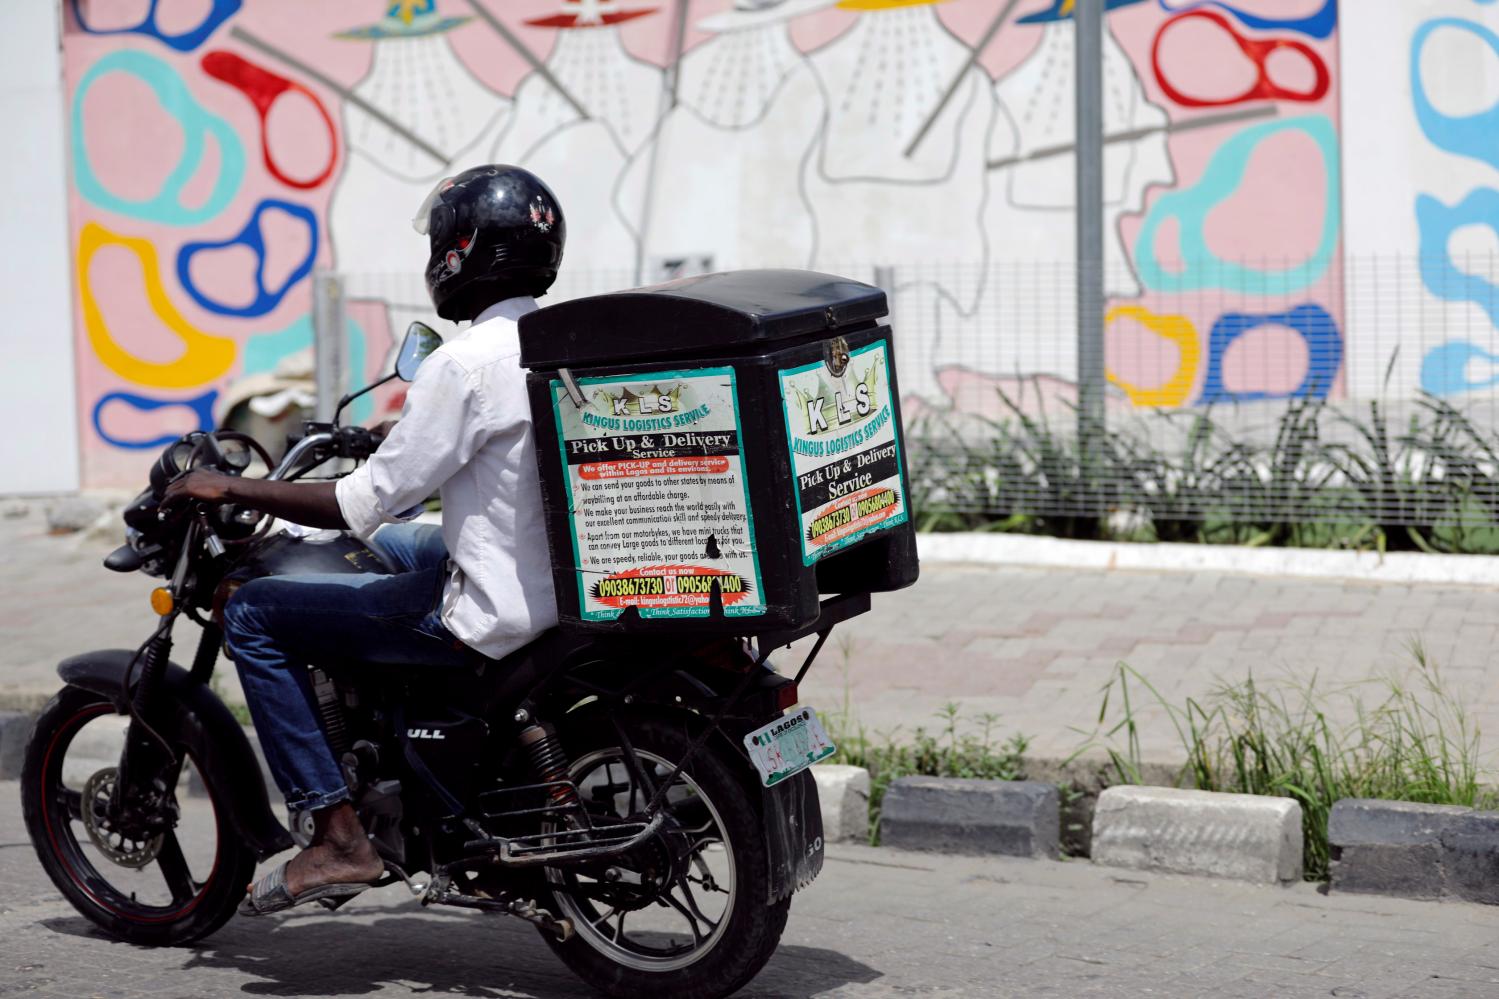 A man rides a motorbike with a delivery box along a road in Ajose Adeogun district in Victoria Island, Lagos, Nigeria June 4, 2018. Picture taken June 4, 2018. REUTERS/Akintunde Akinleye - RC1C91FE5F80